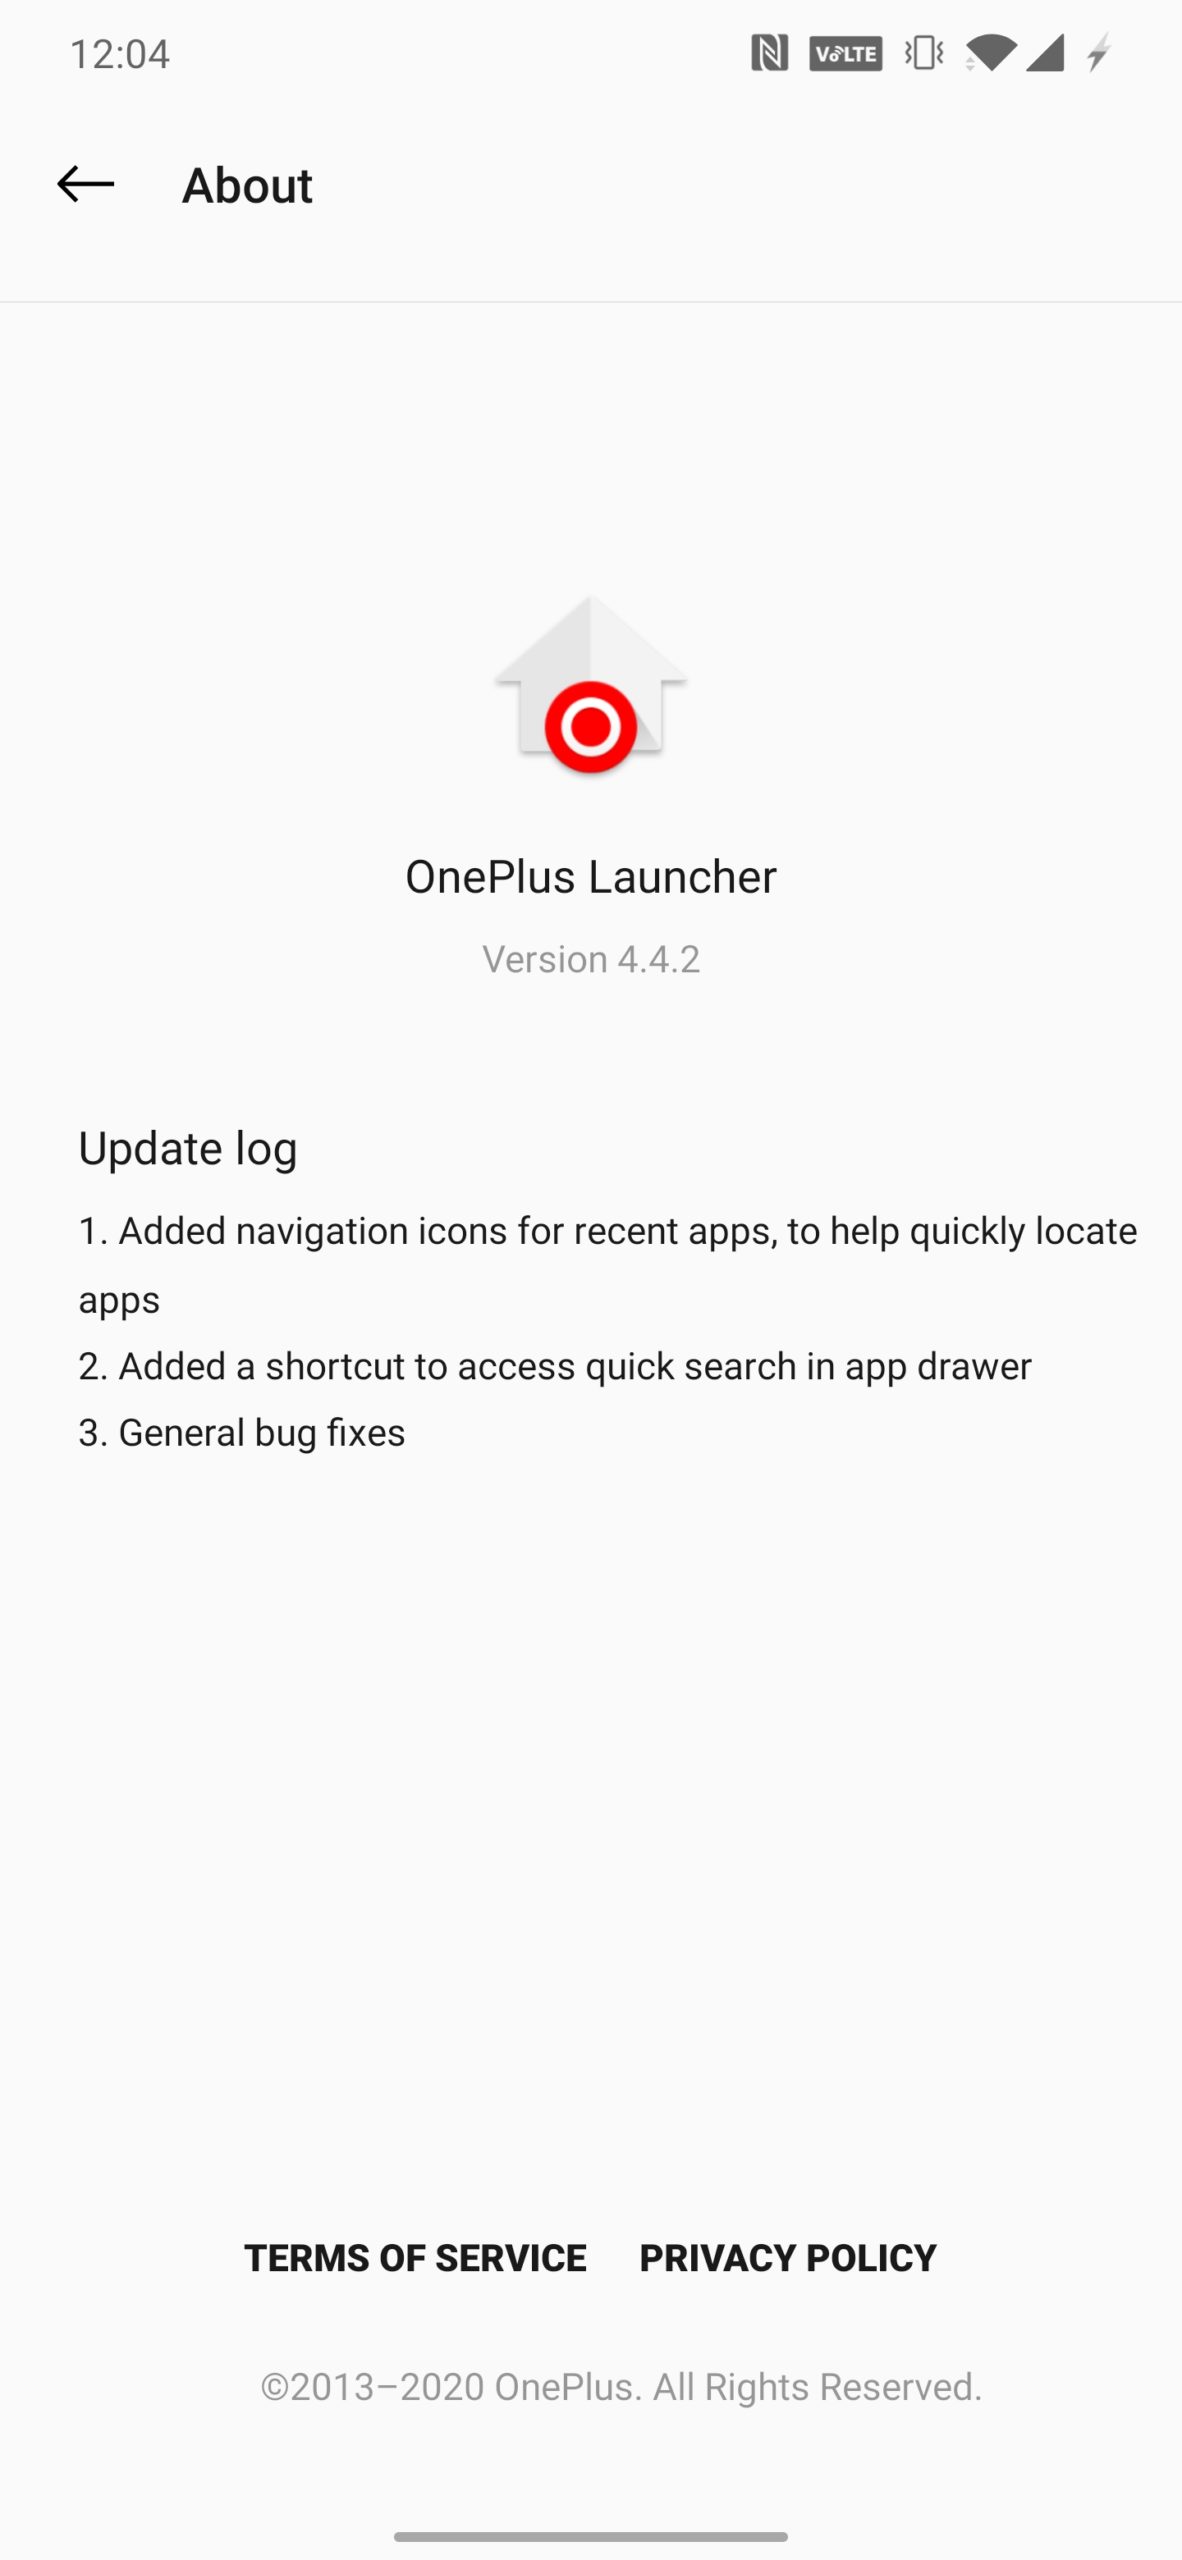 OnePlus Launcher 4.4.2 adds shortcut to access quick search and navigation icon for recent apps